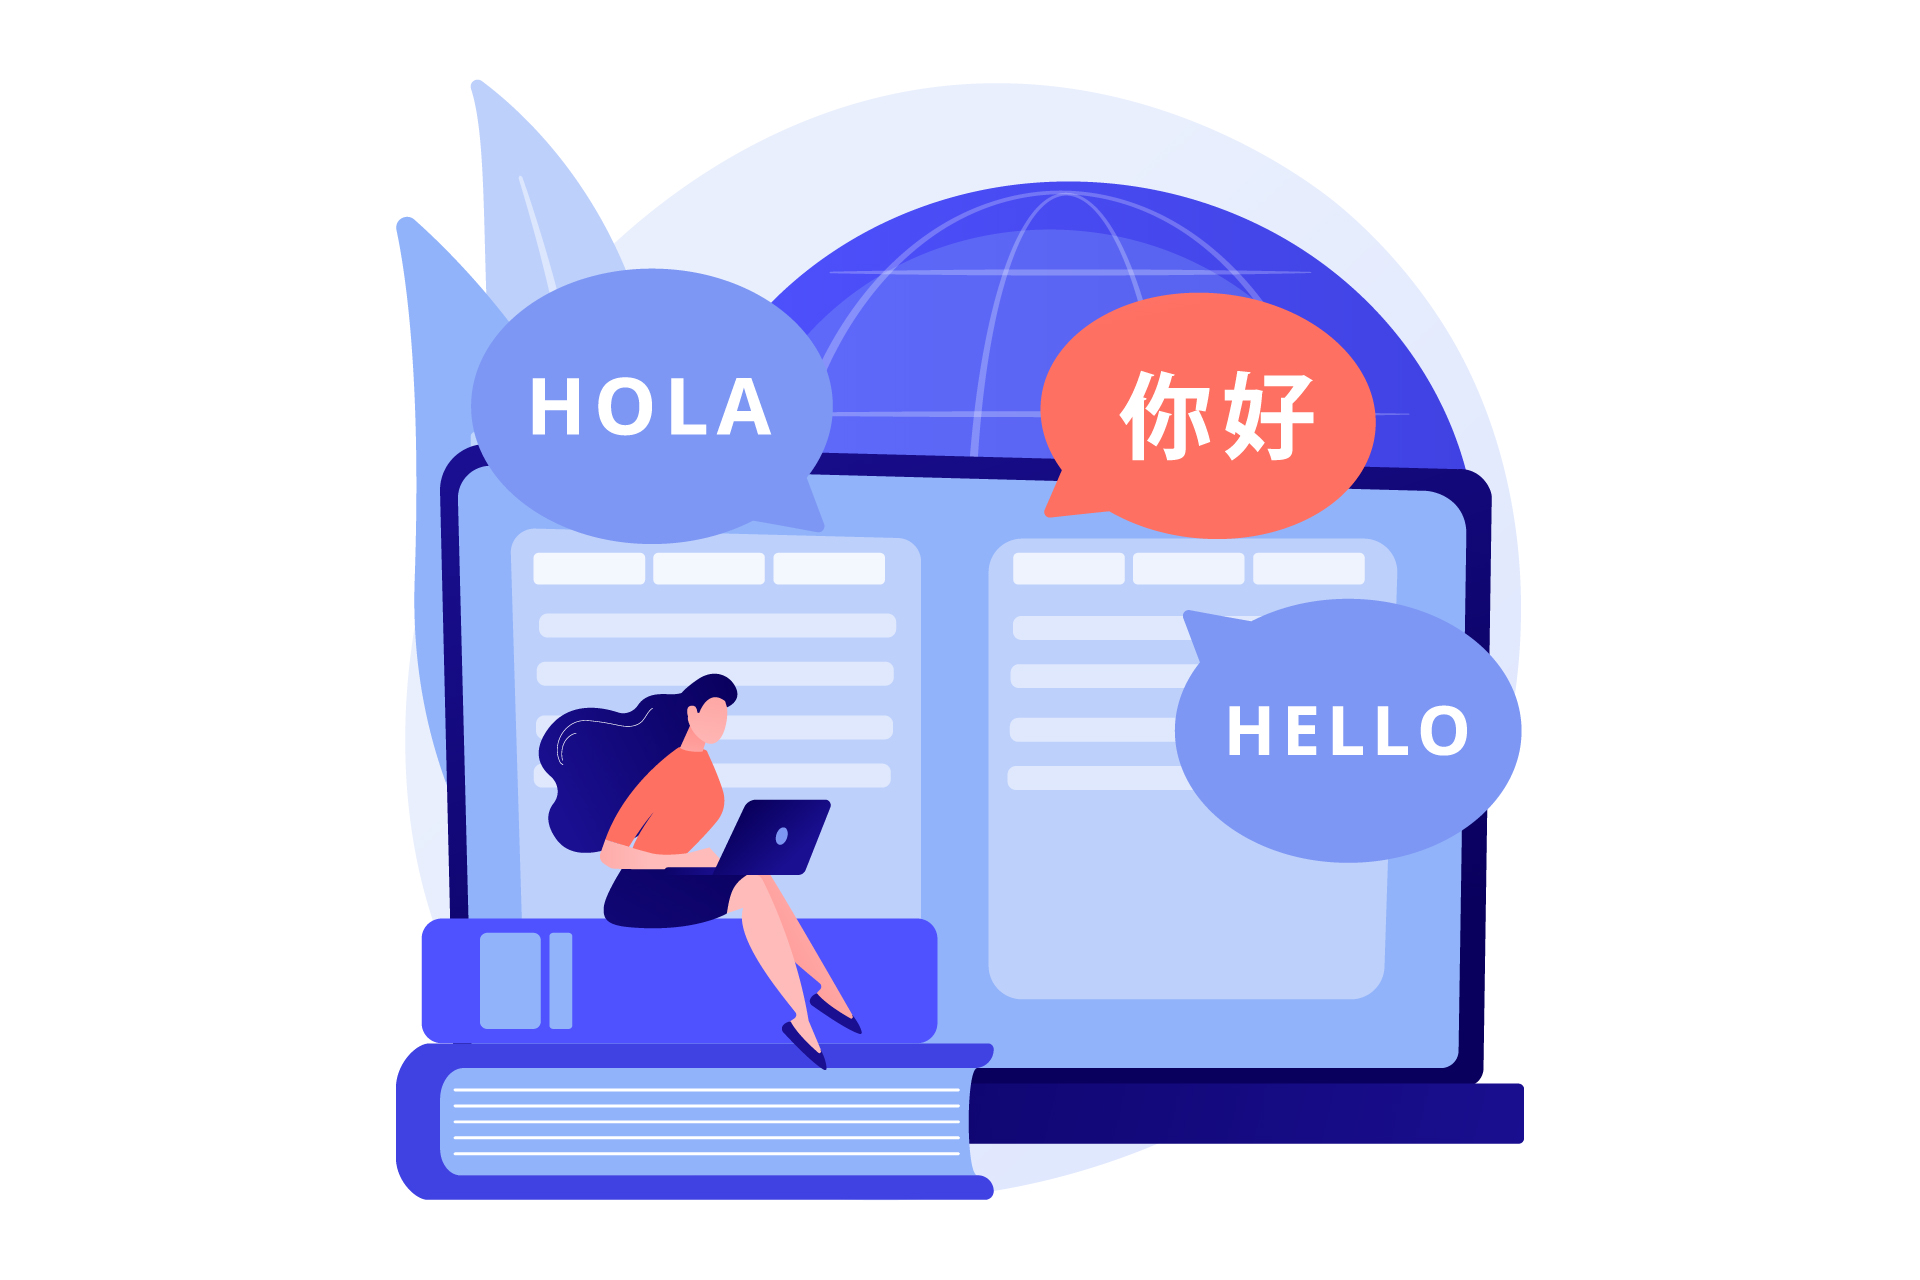 What are the benefits of a multilingual e-shop